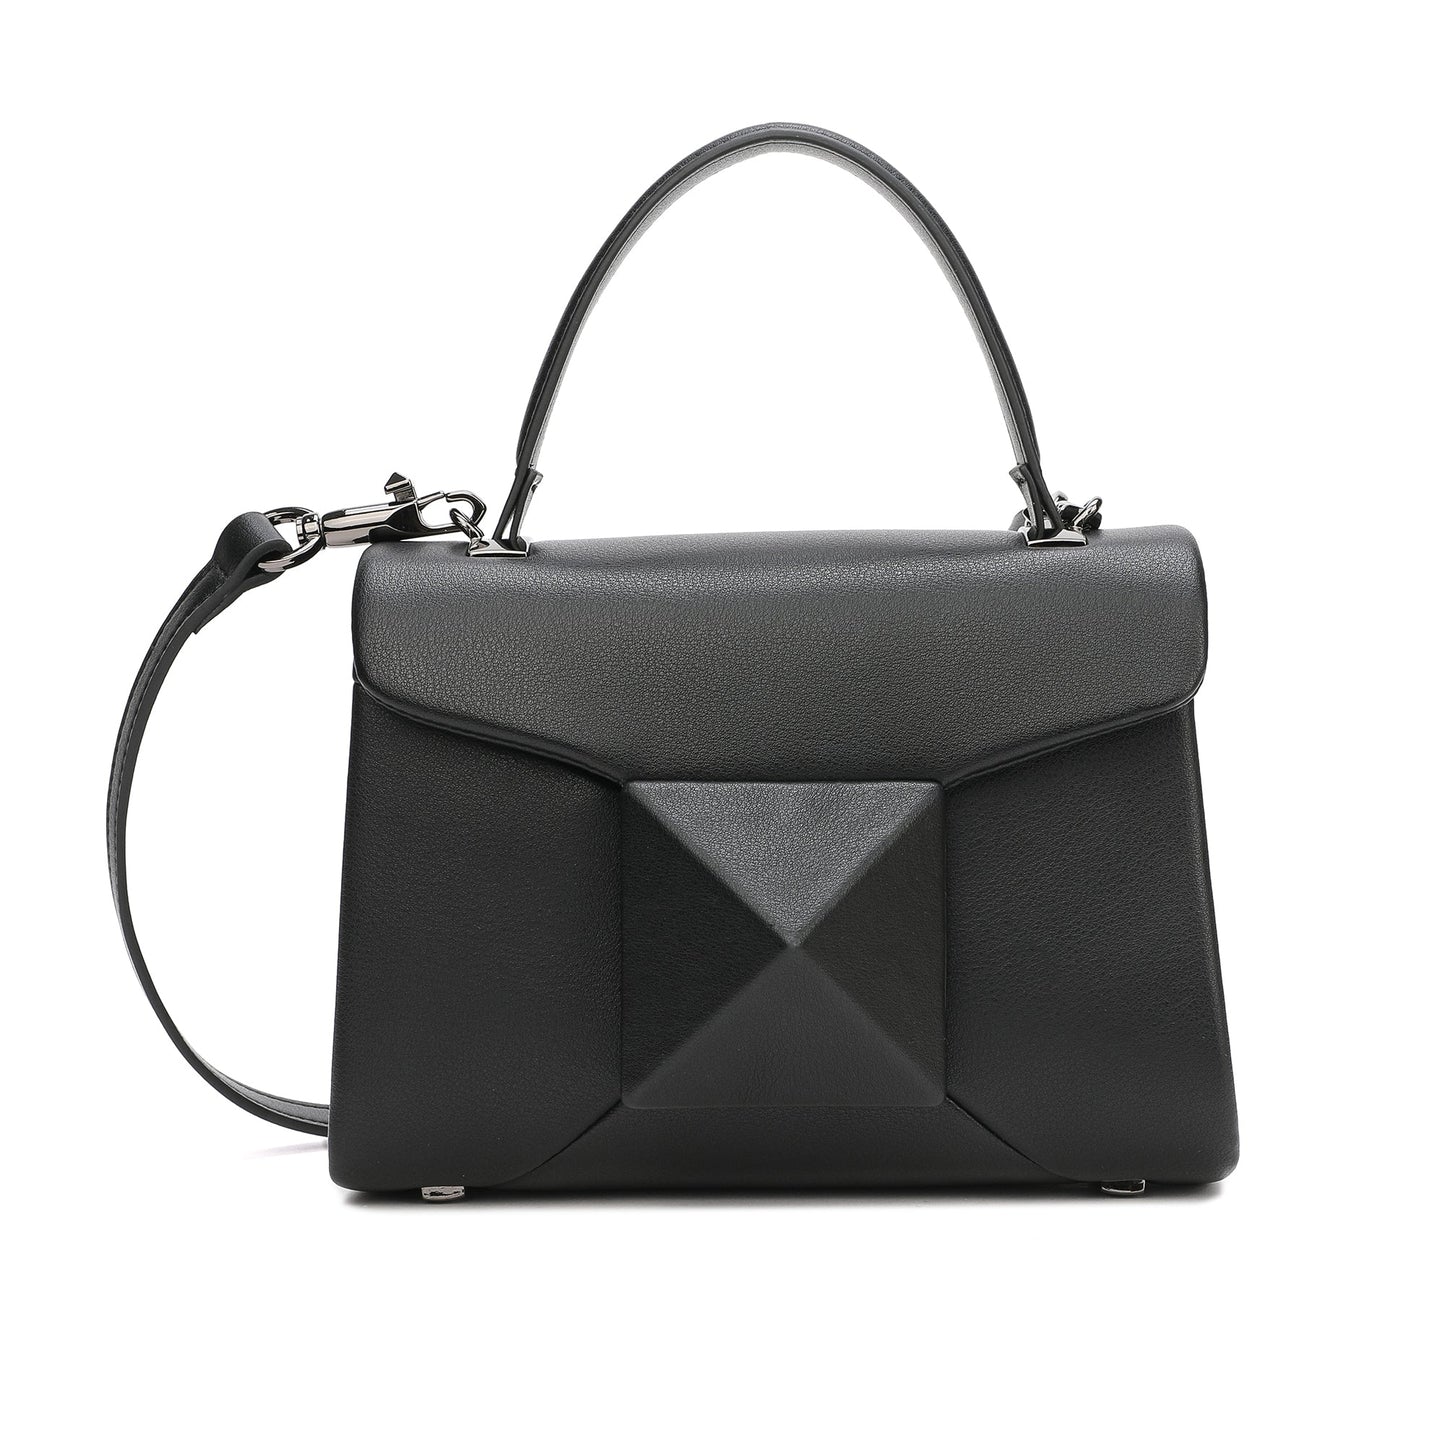 Full-Grain Soft Leather Top-Handle